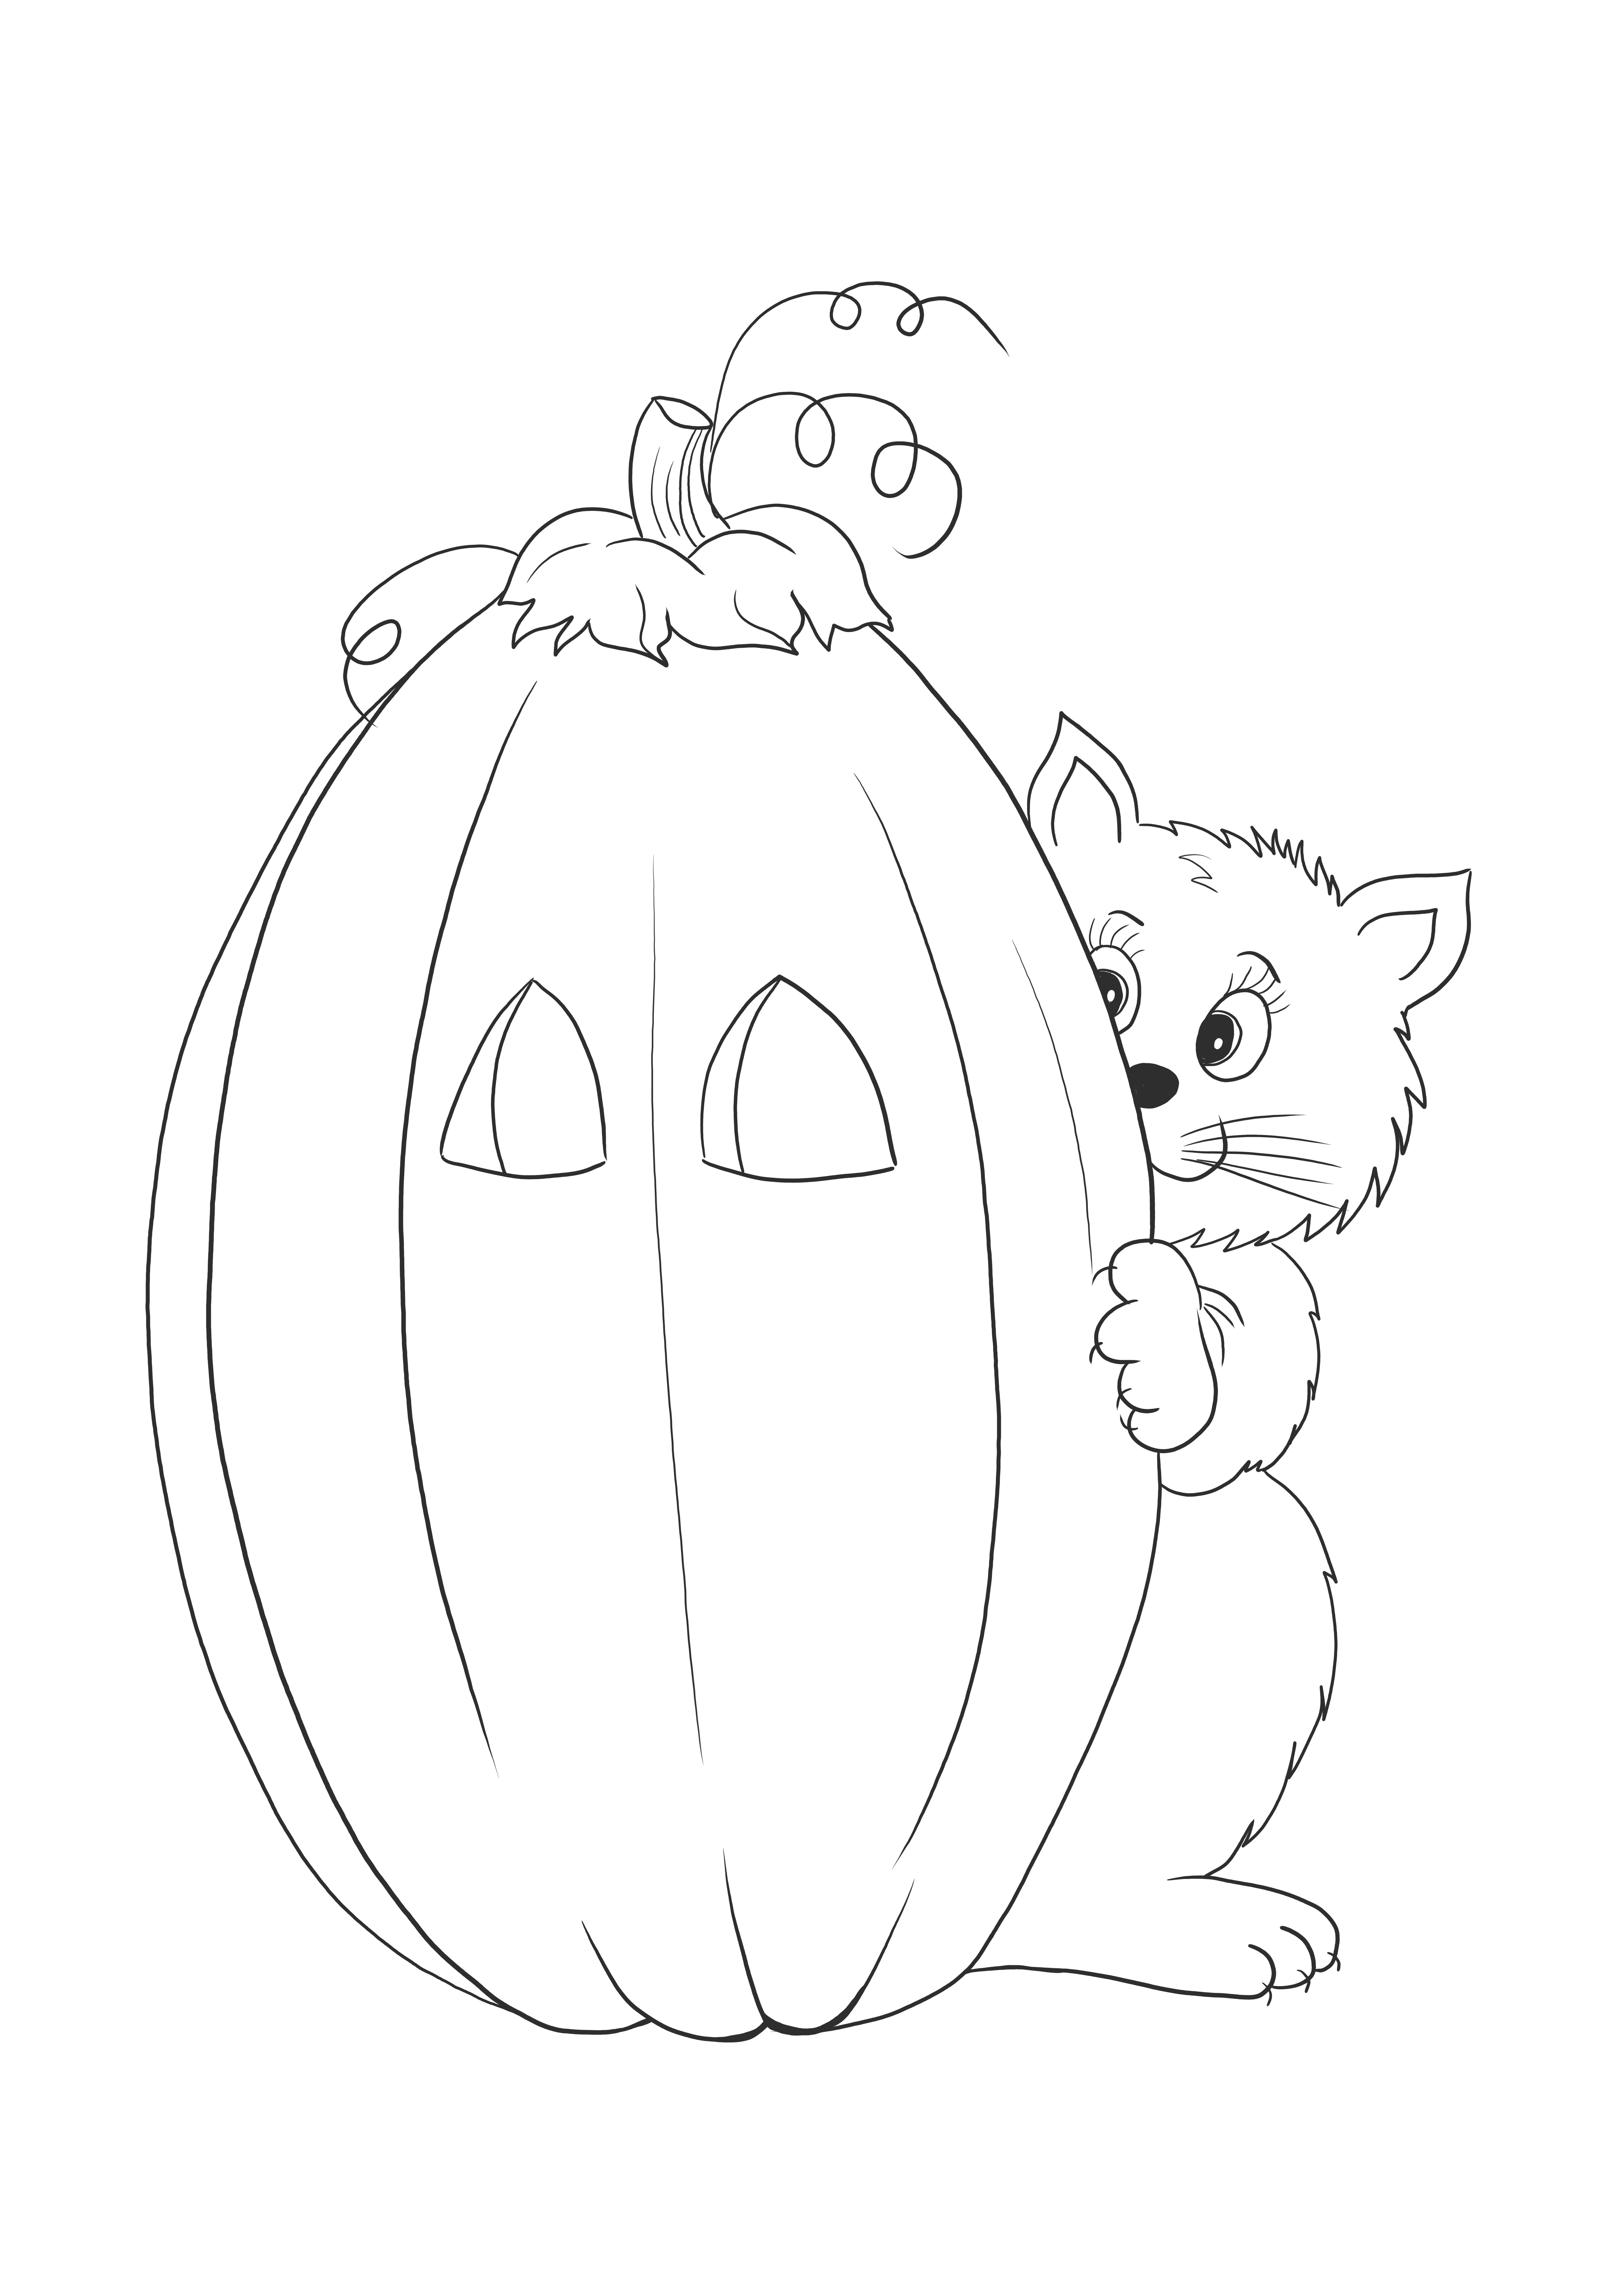 Halloween pumpkin and cat easy to color and print free sheet